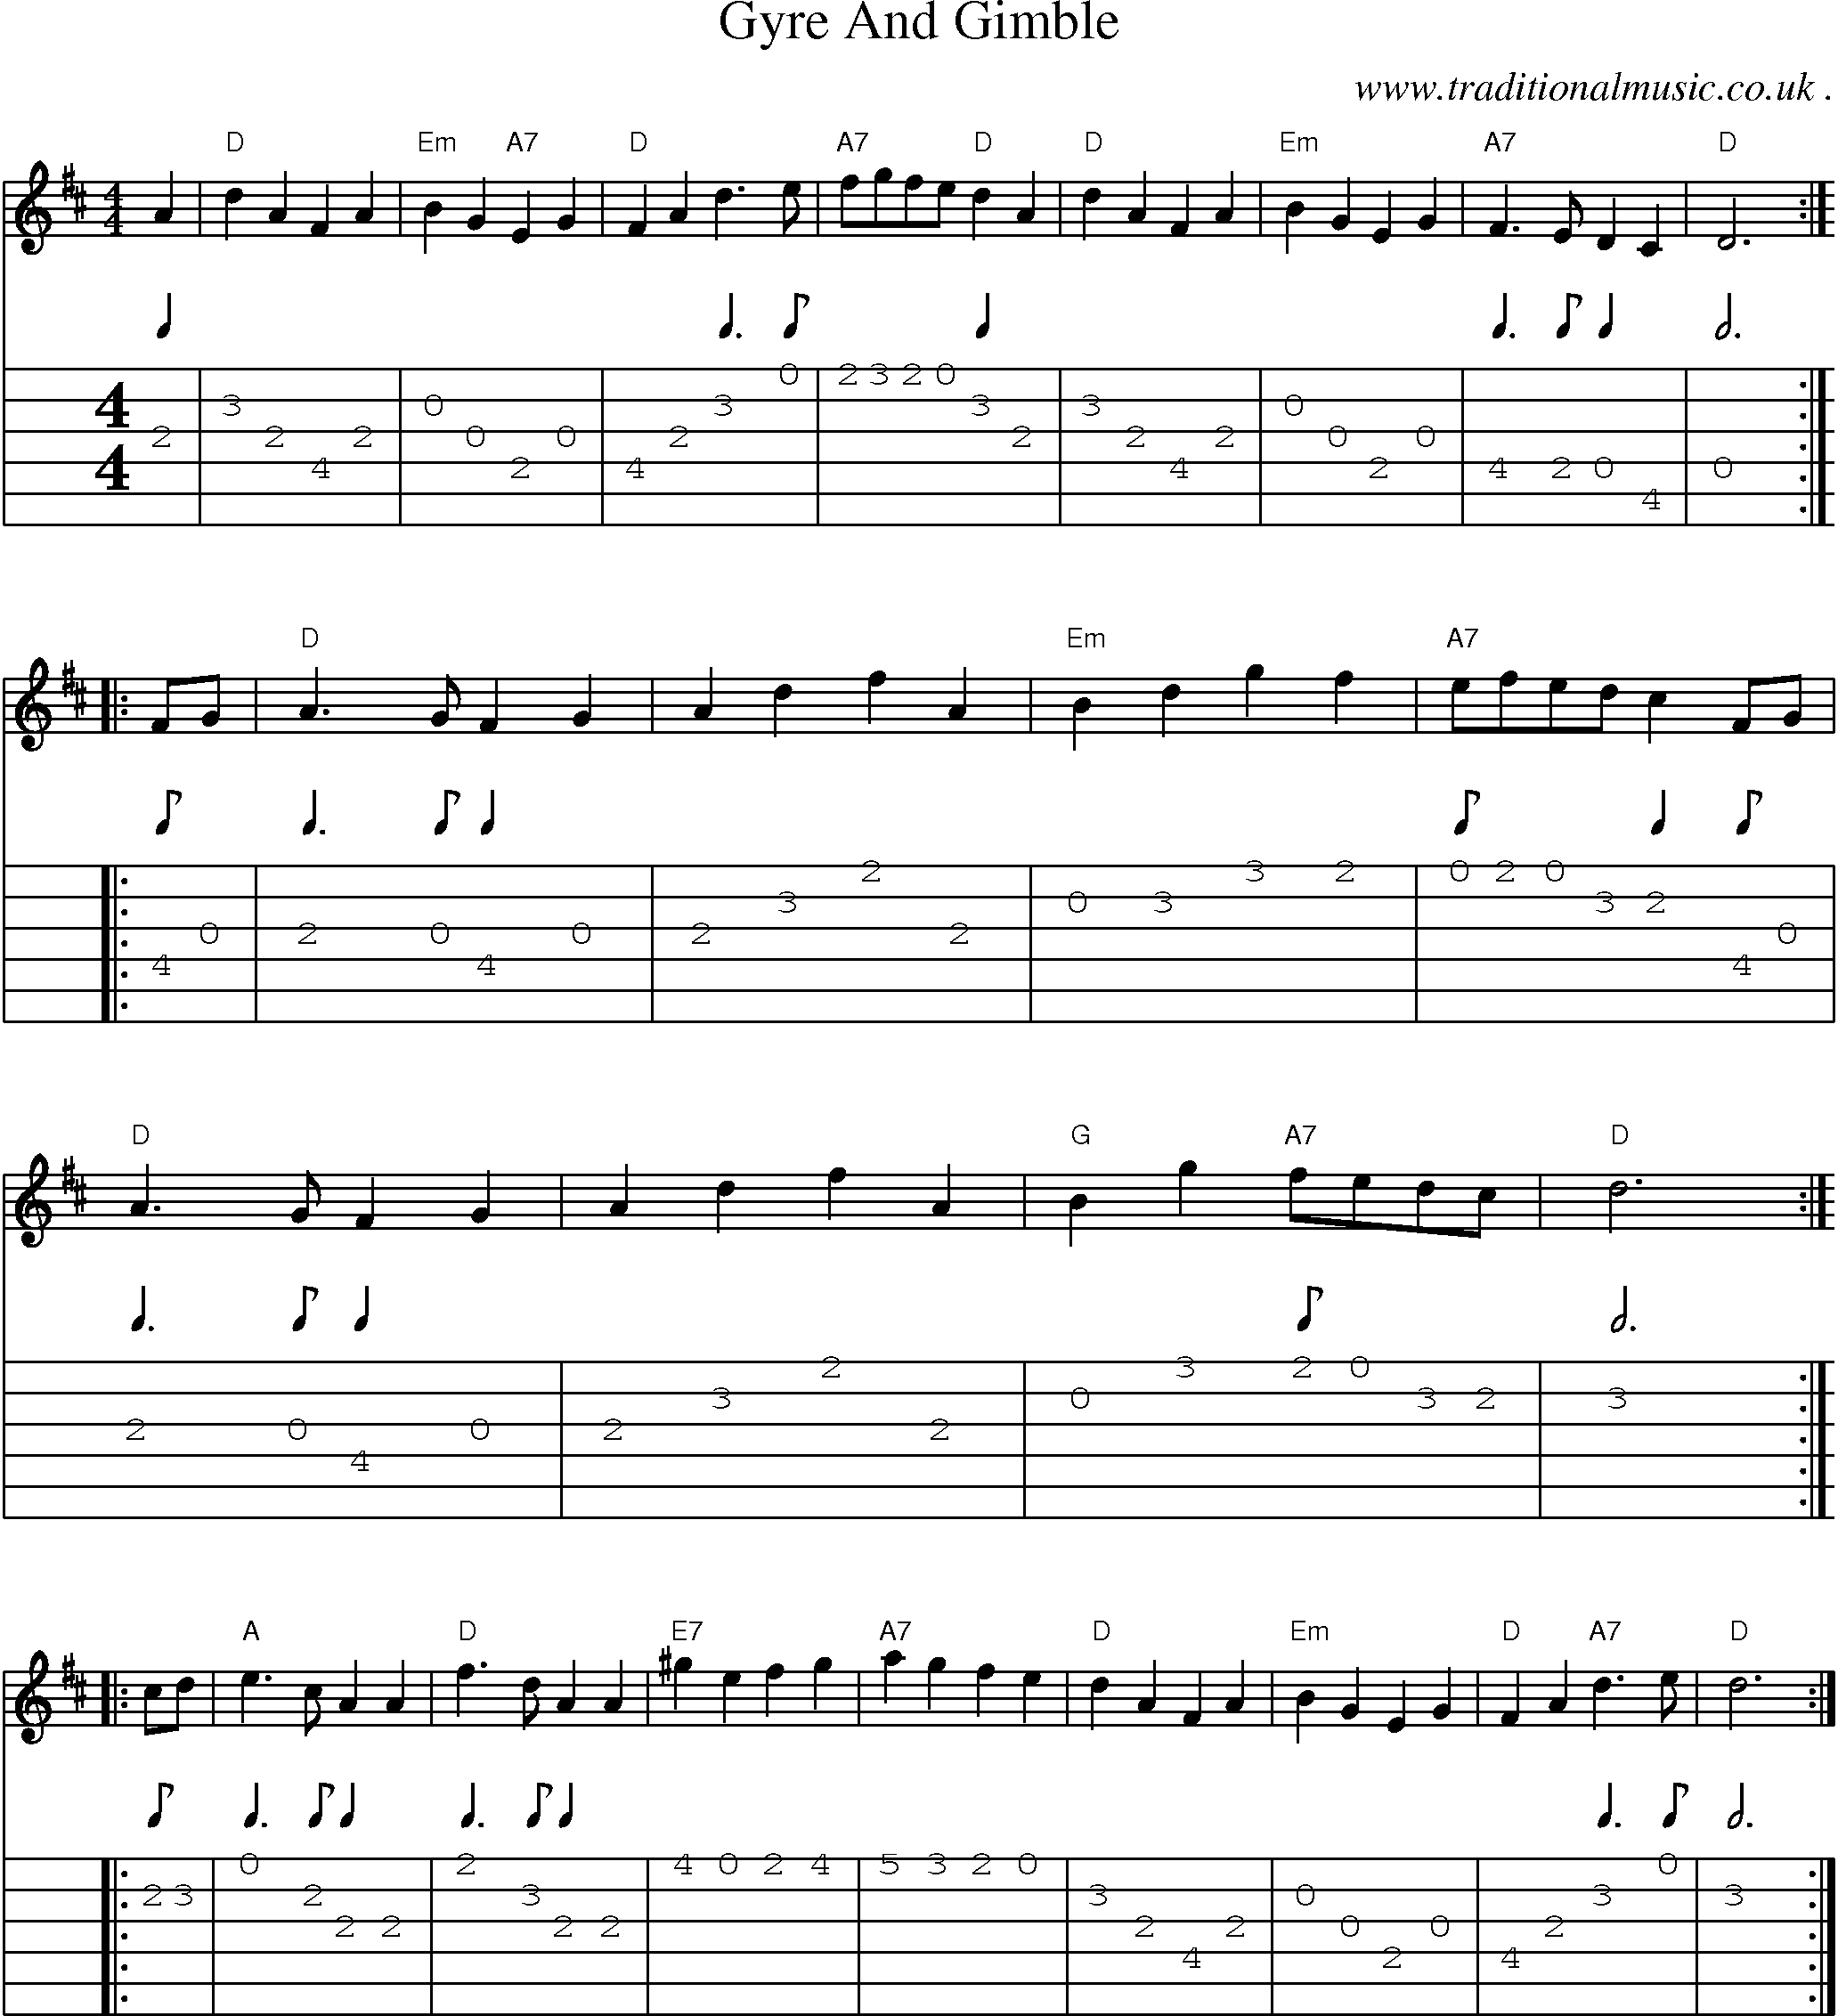 Sheet-Music and Guitar Tabs for Gyre And Gimble